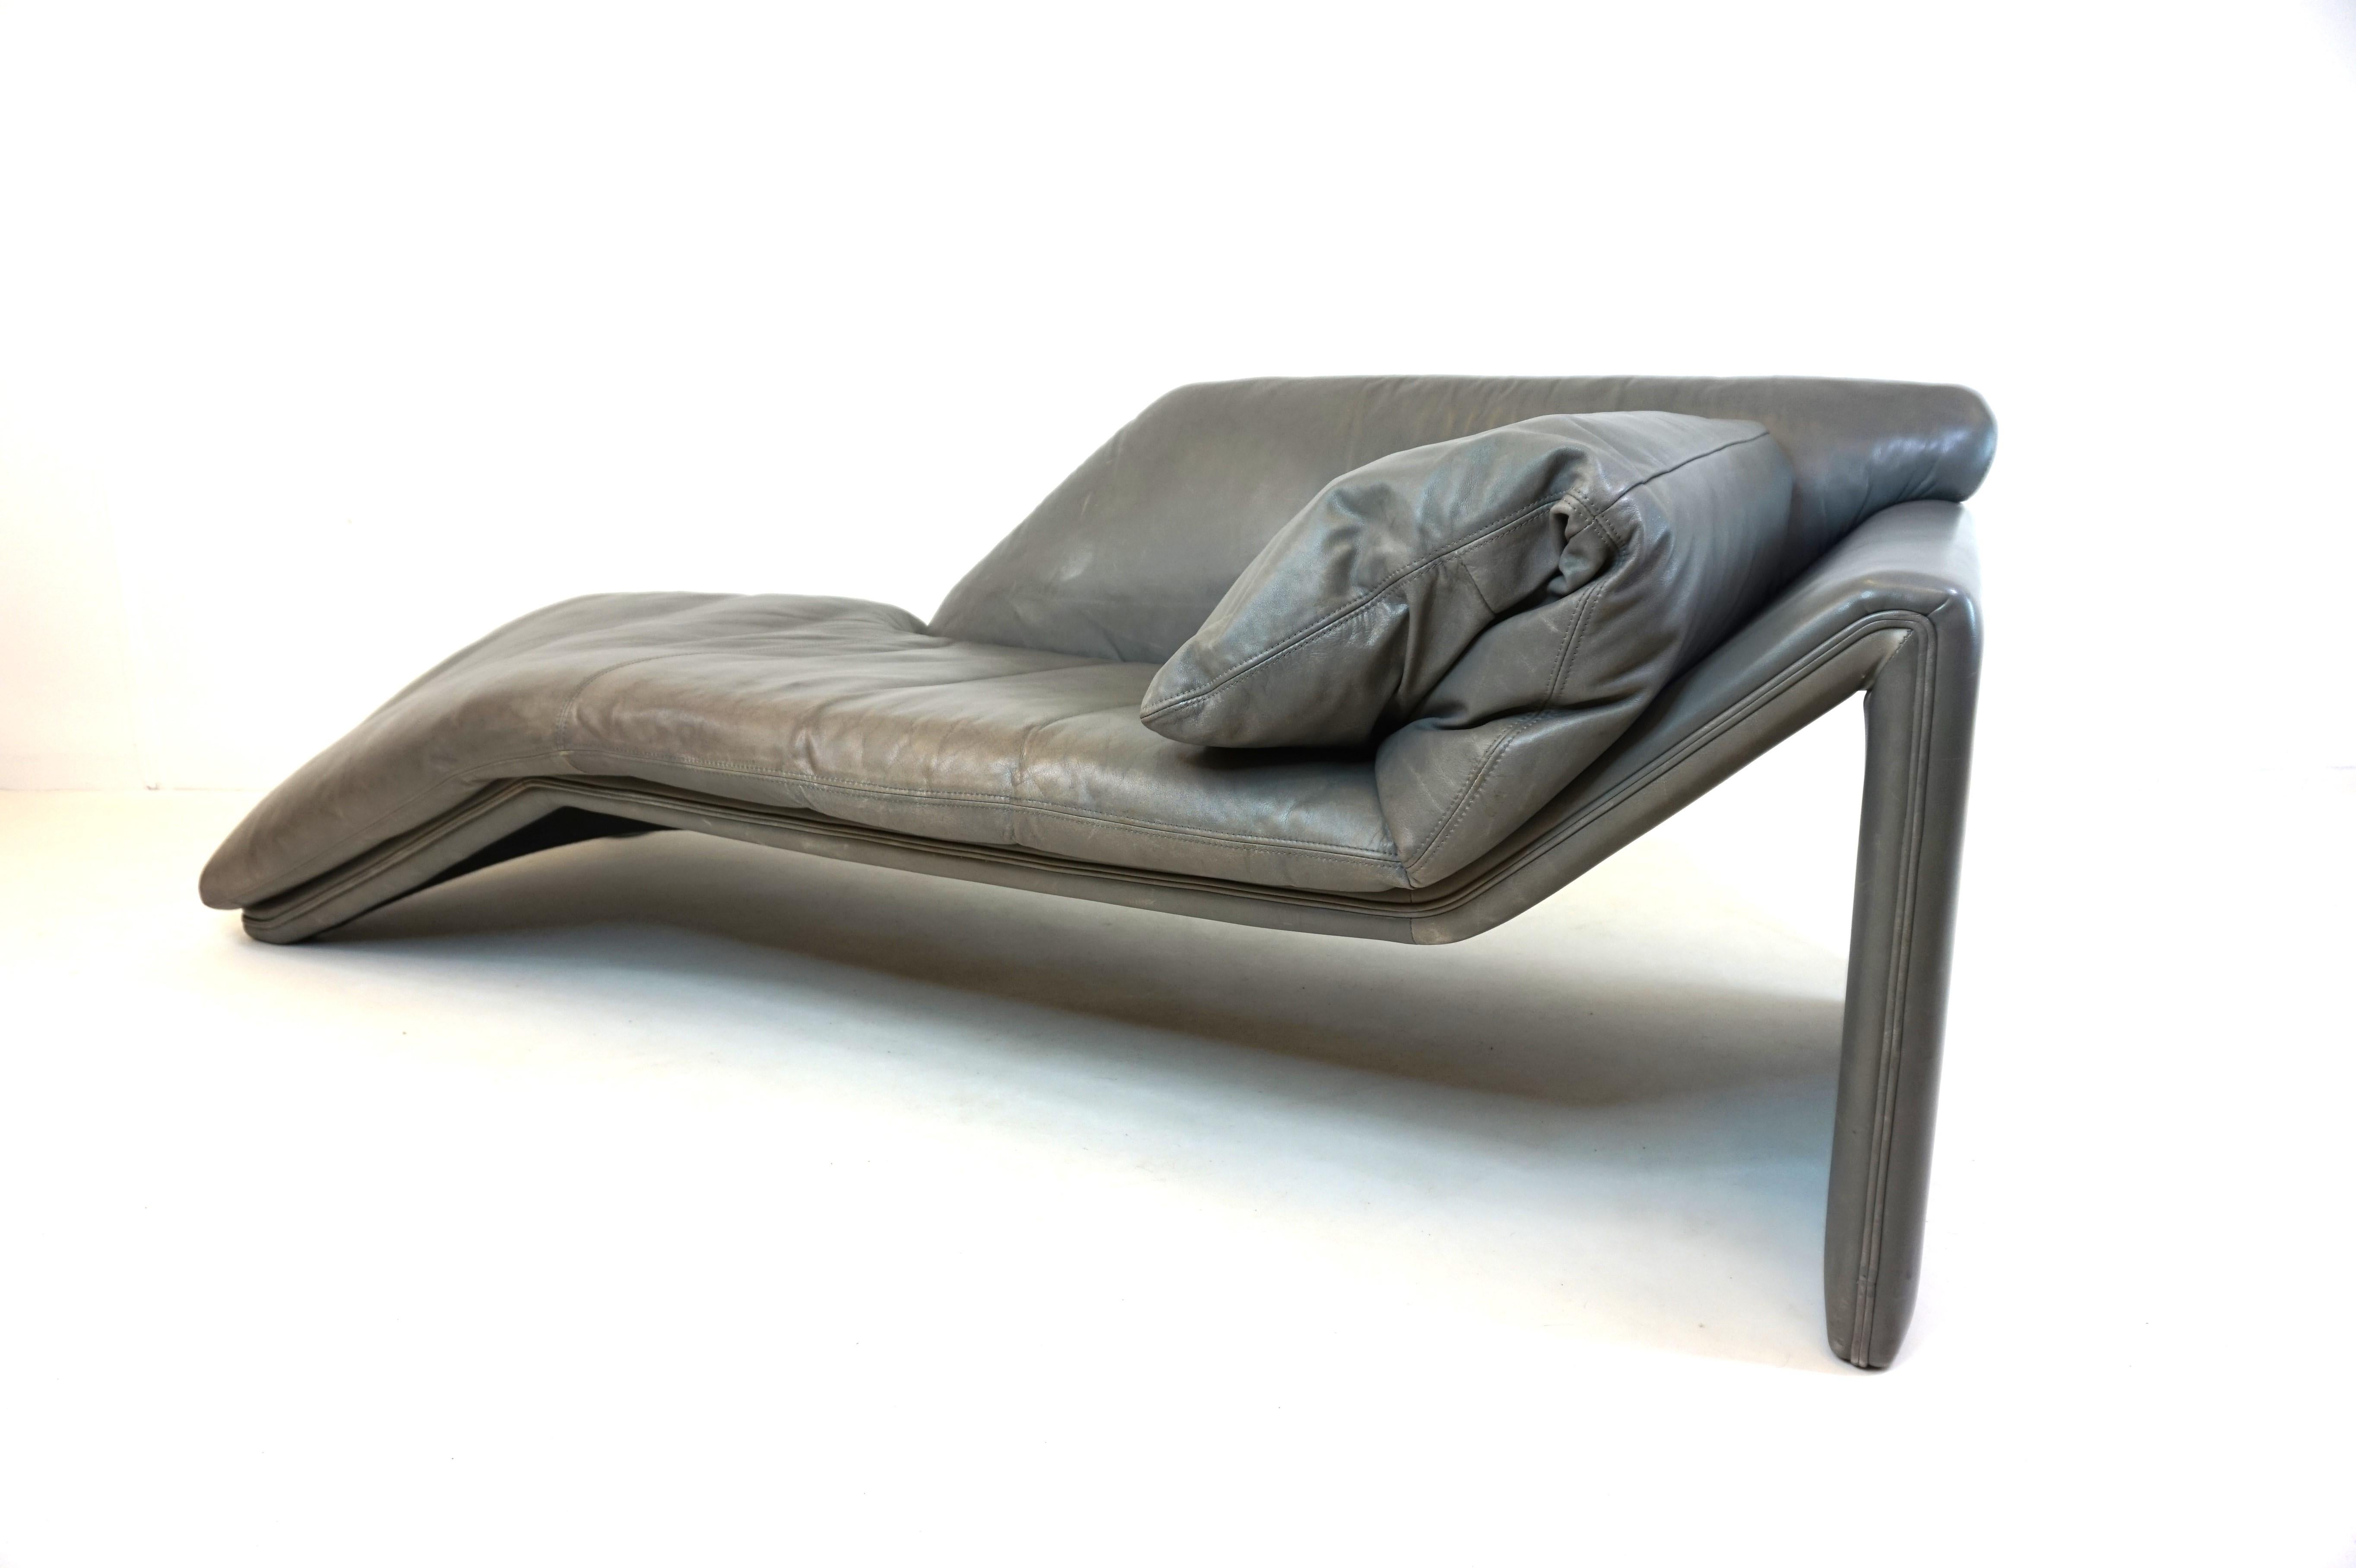 This top-class daybed by Etienne Aigner comes in gray leather and is in very nice condition. The leather is soft and without damage, only a slight patina is visible. The frame, which is also covered in leather, has a small abrasion on the rear side